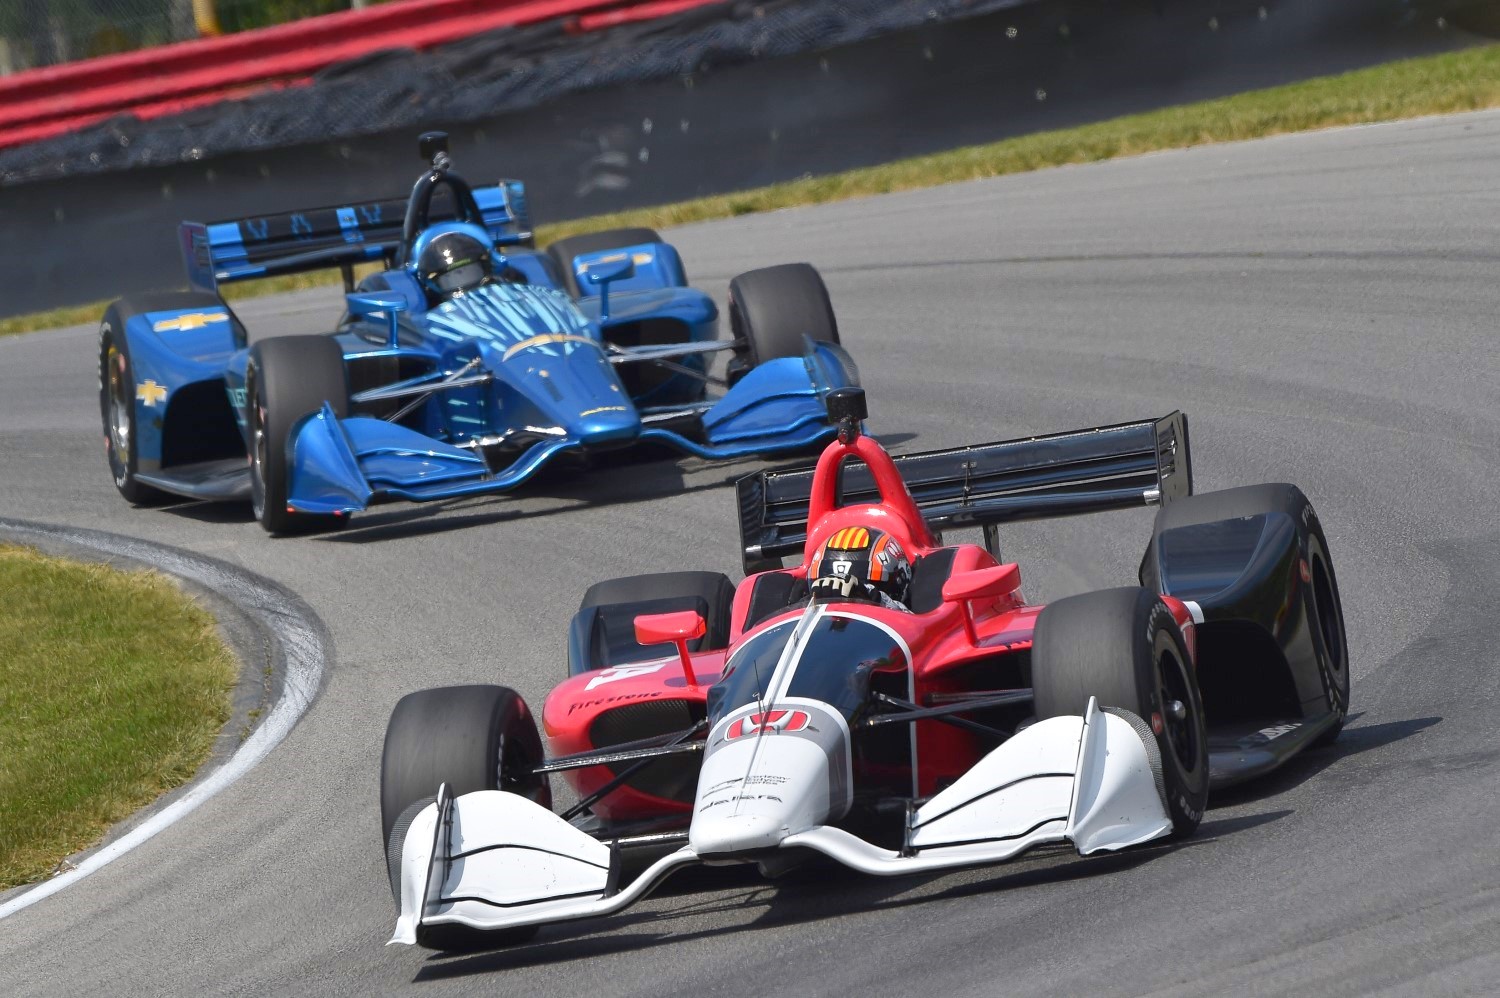 Will IndyCar become a wankerless series?